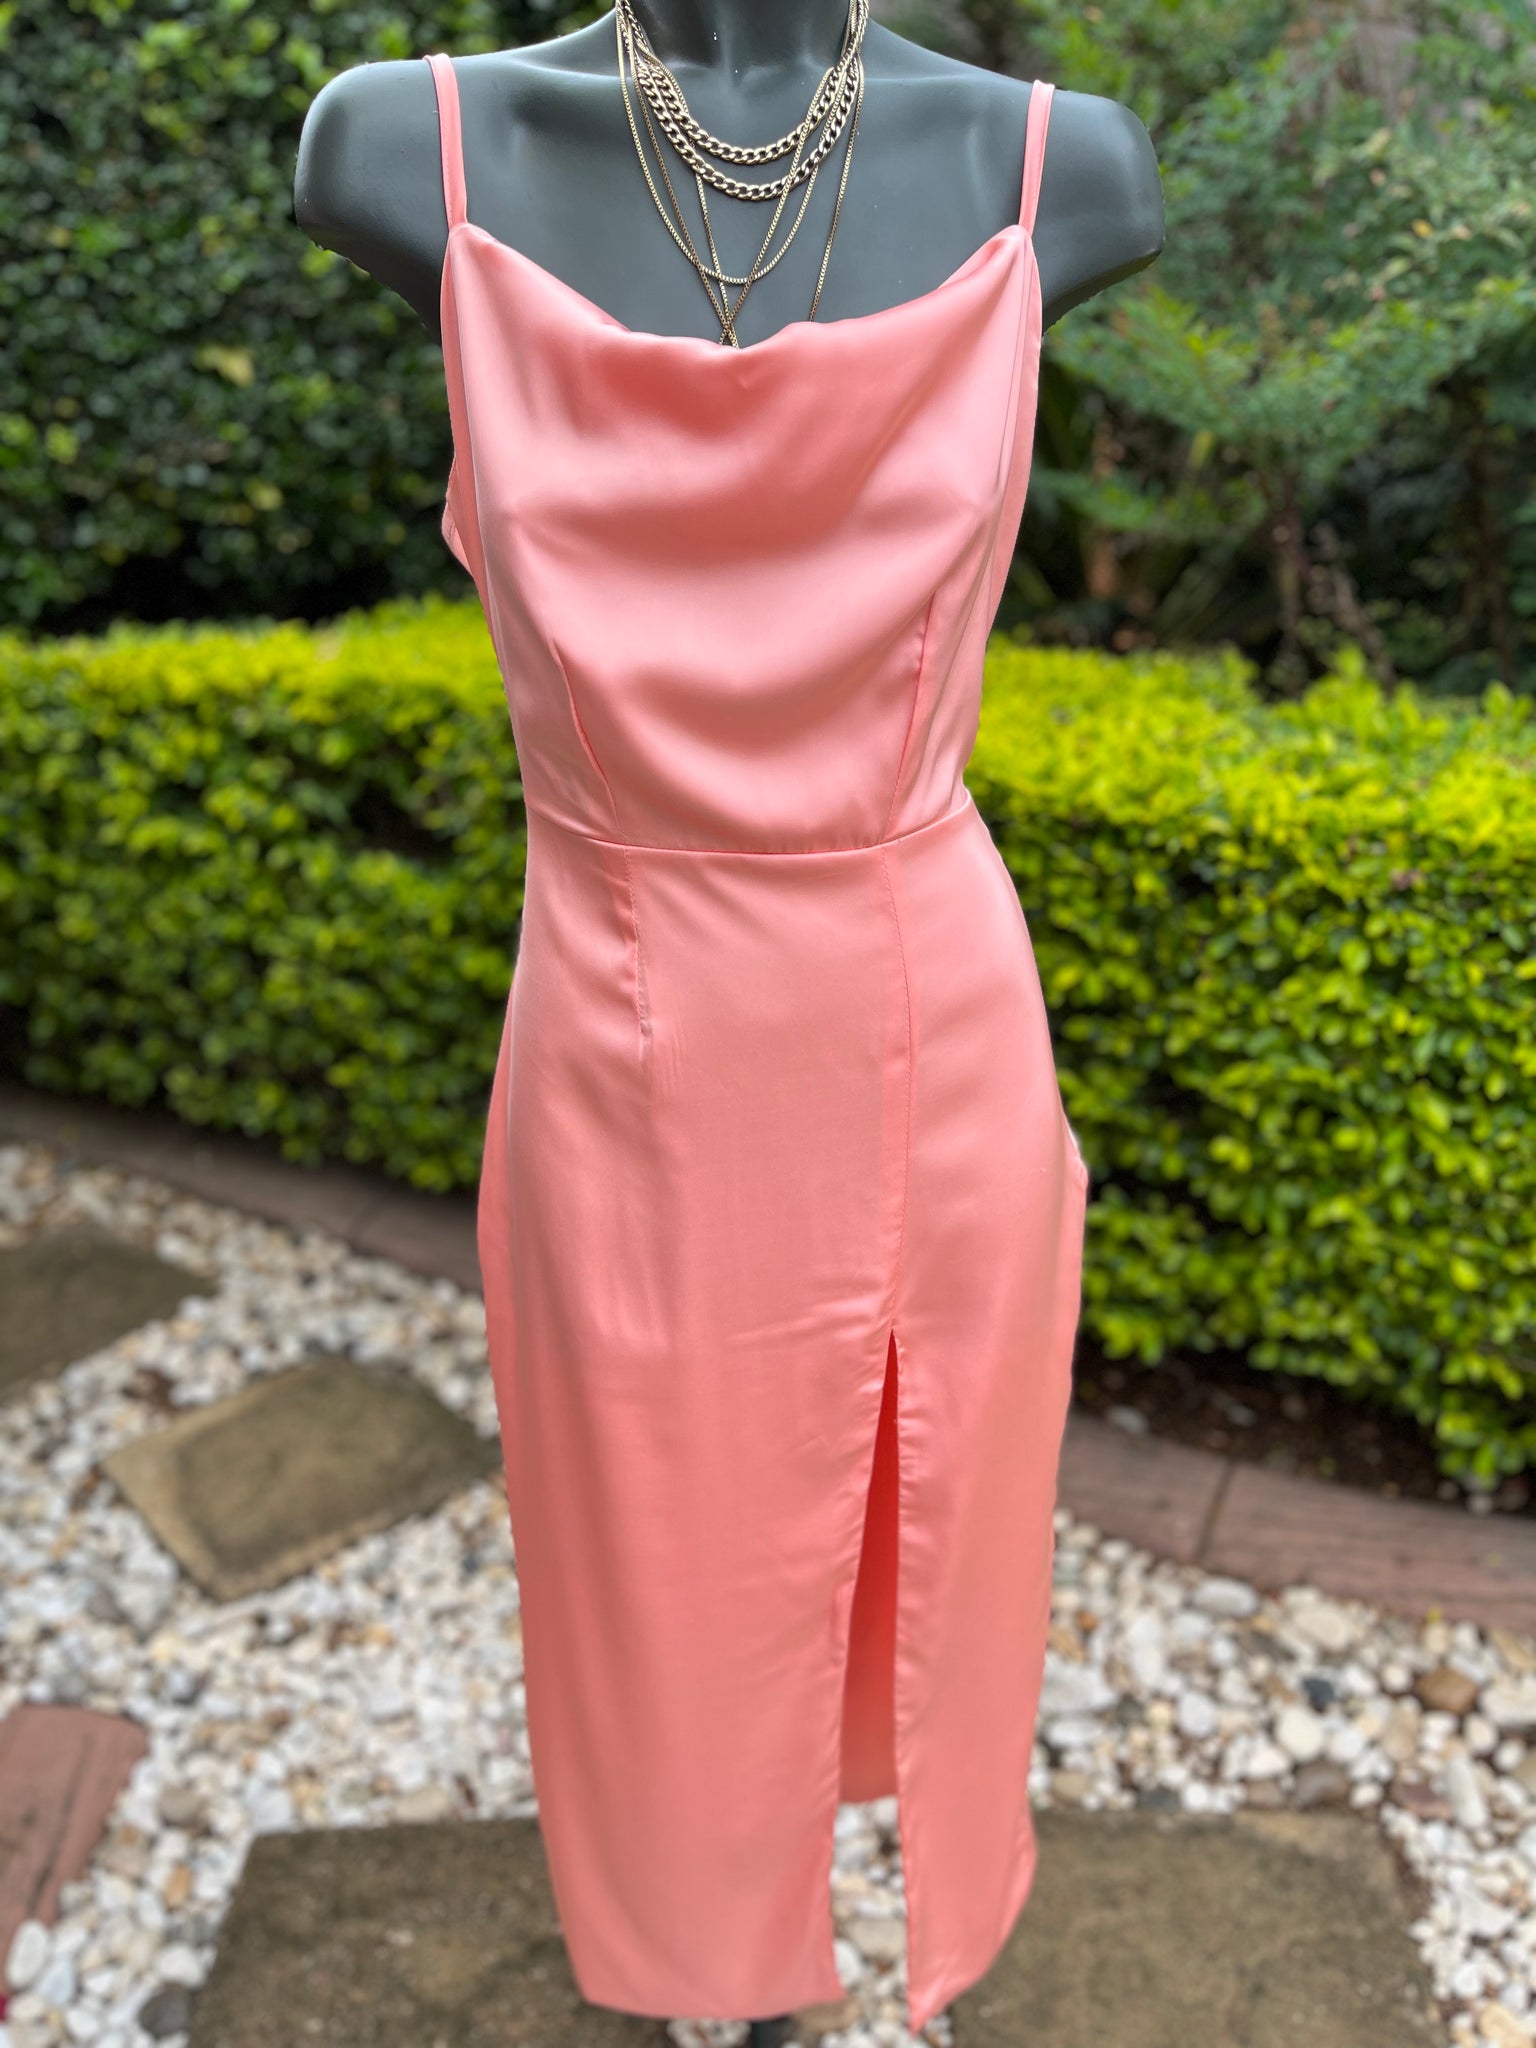 VADA Brand New Peach Satin Dress with Side Slit detail - Size Large